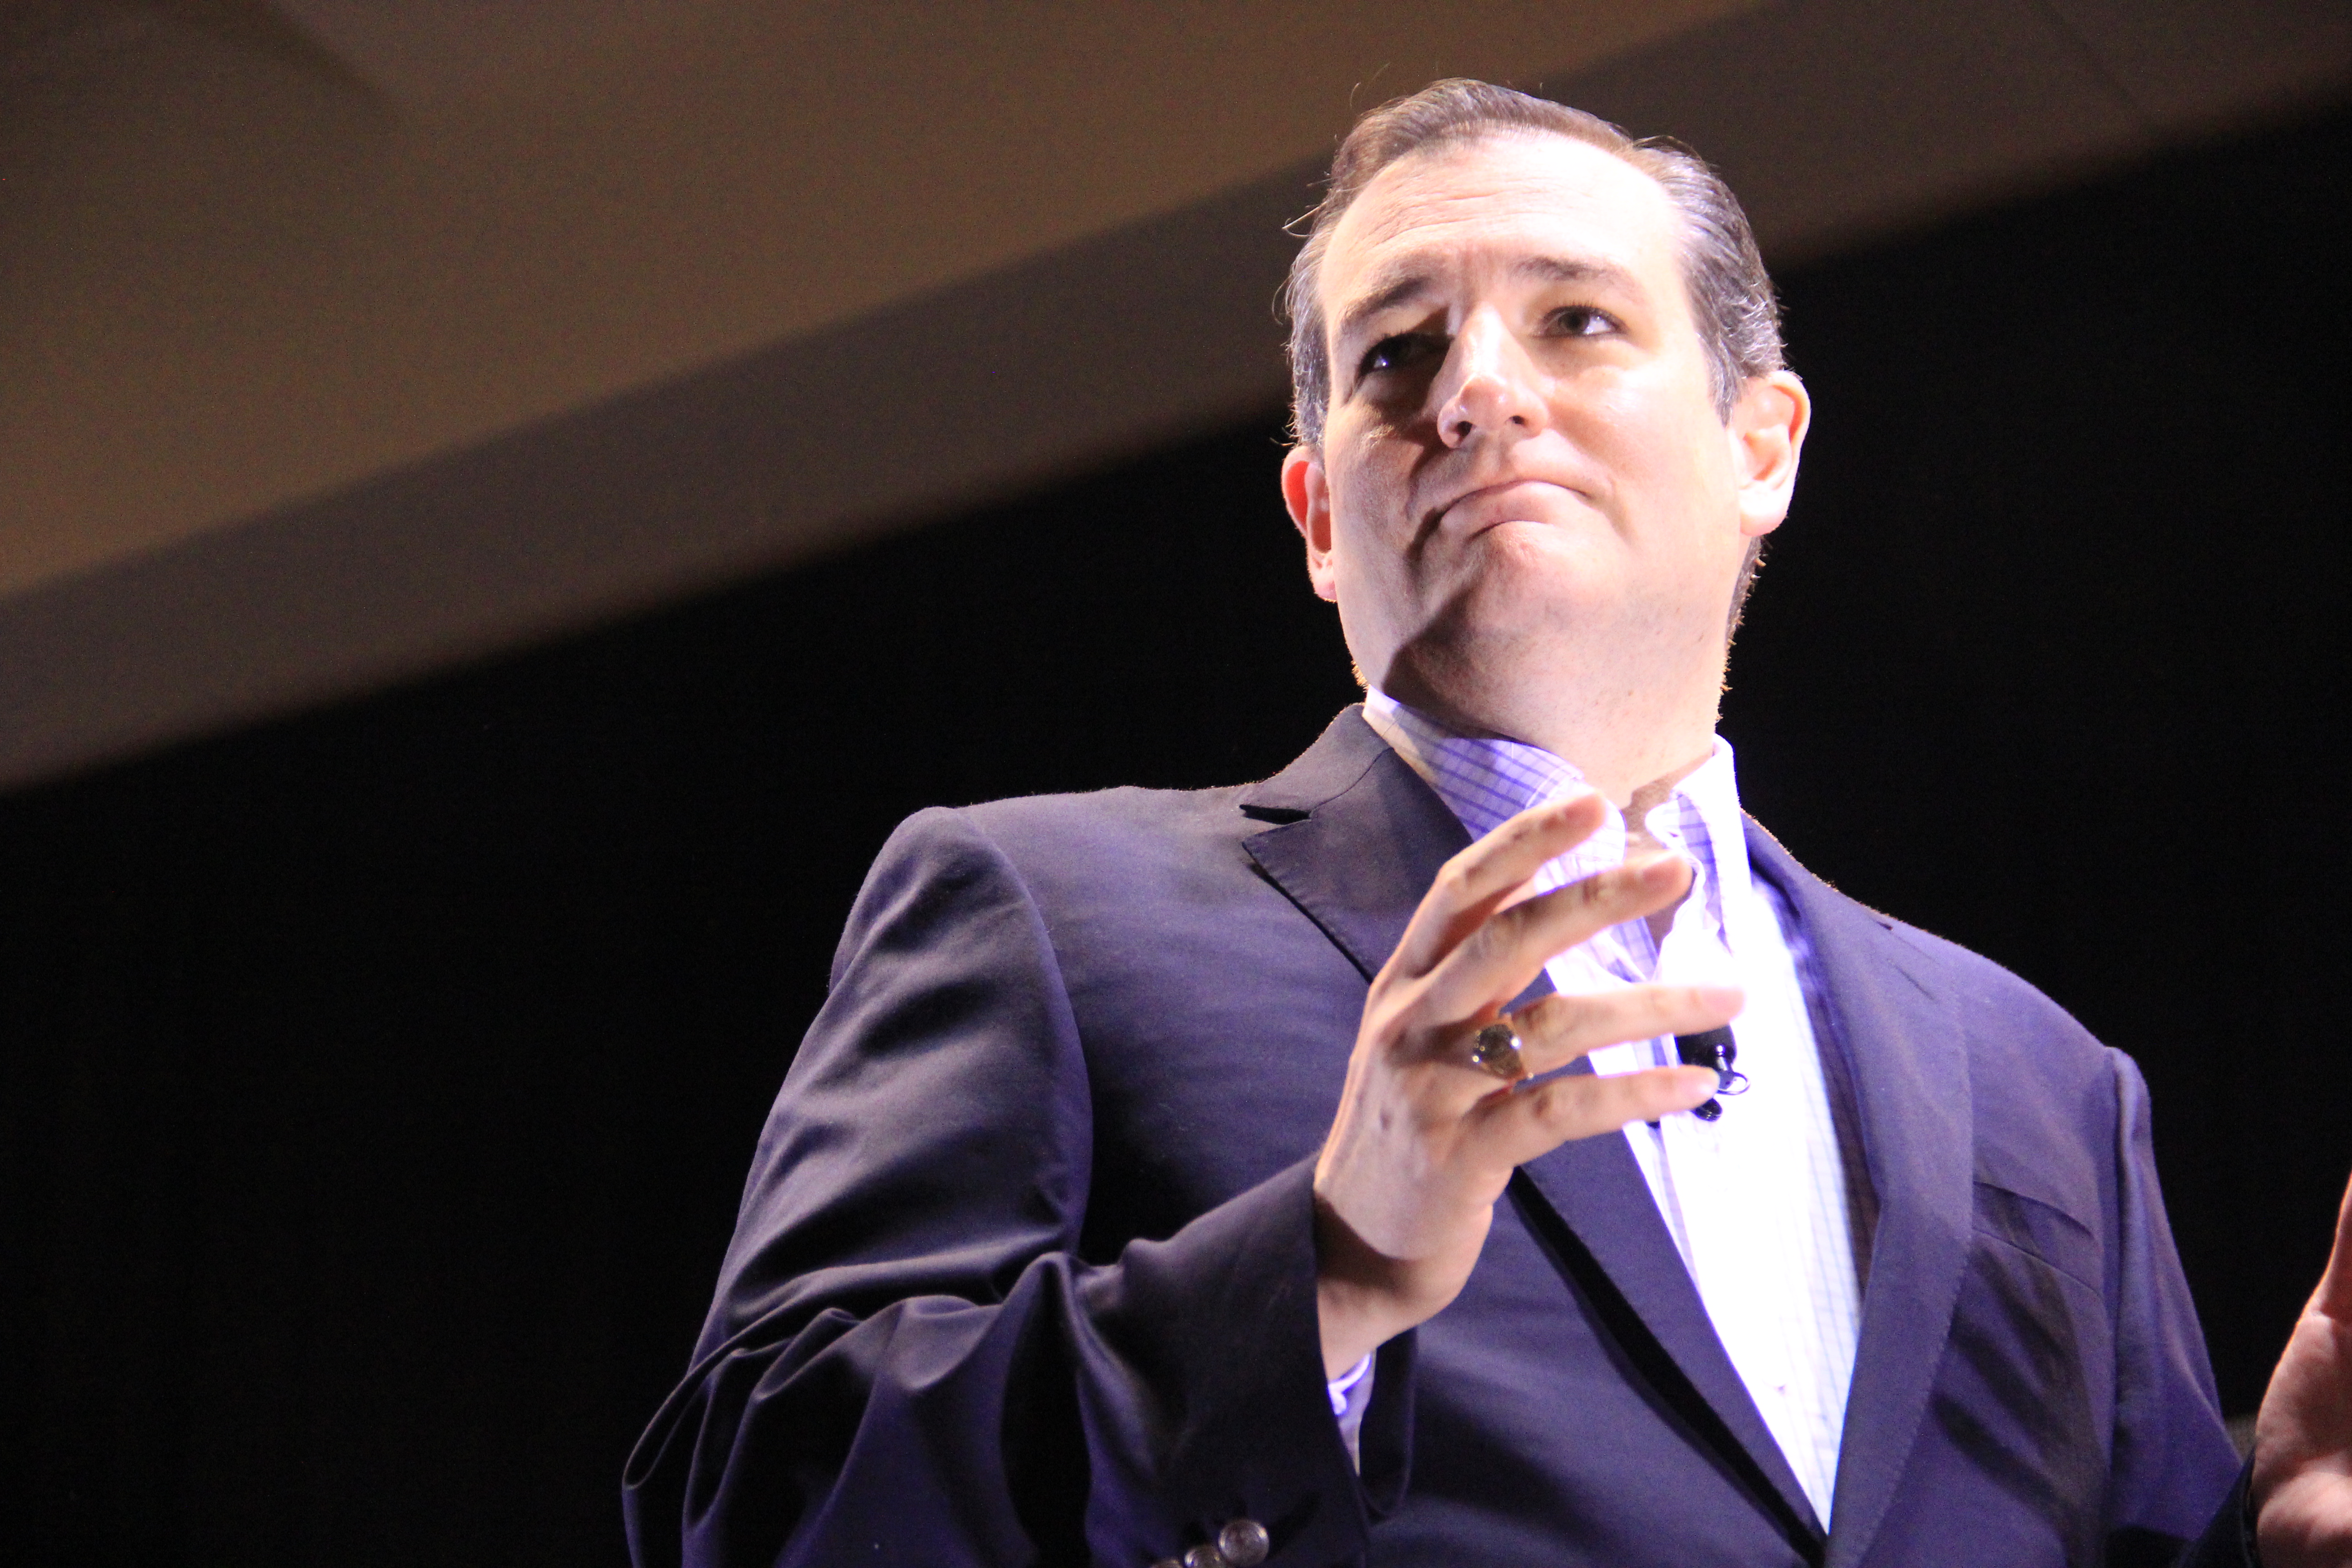 Supreme Court justices consider Ted Cruz case challenging campaign finance law